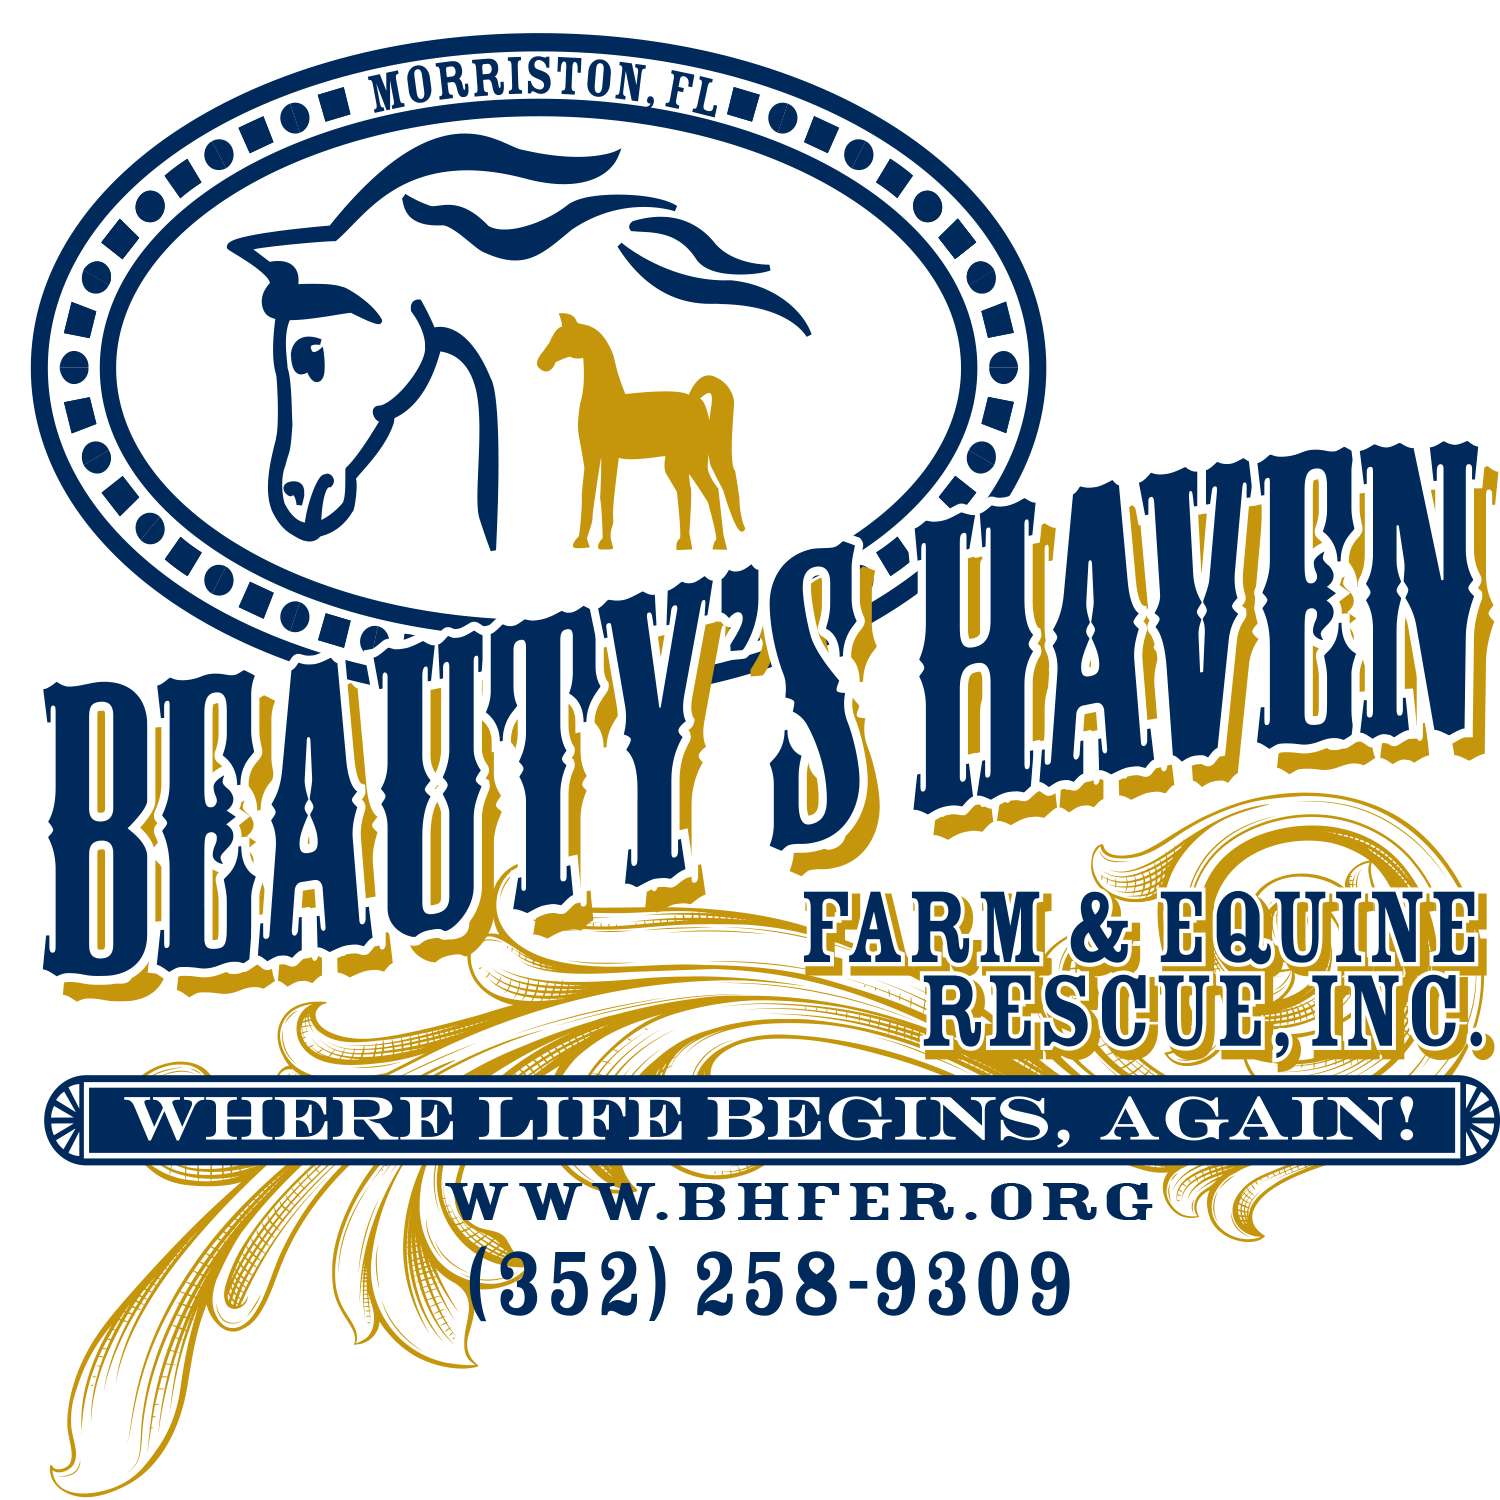 Beauty's Haven Farm and Equine Rescue, Inc.